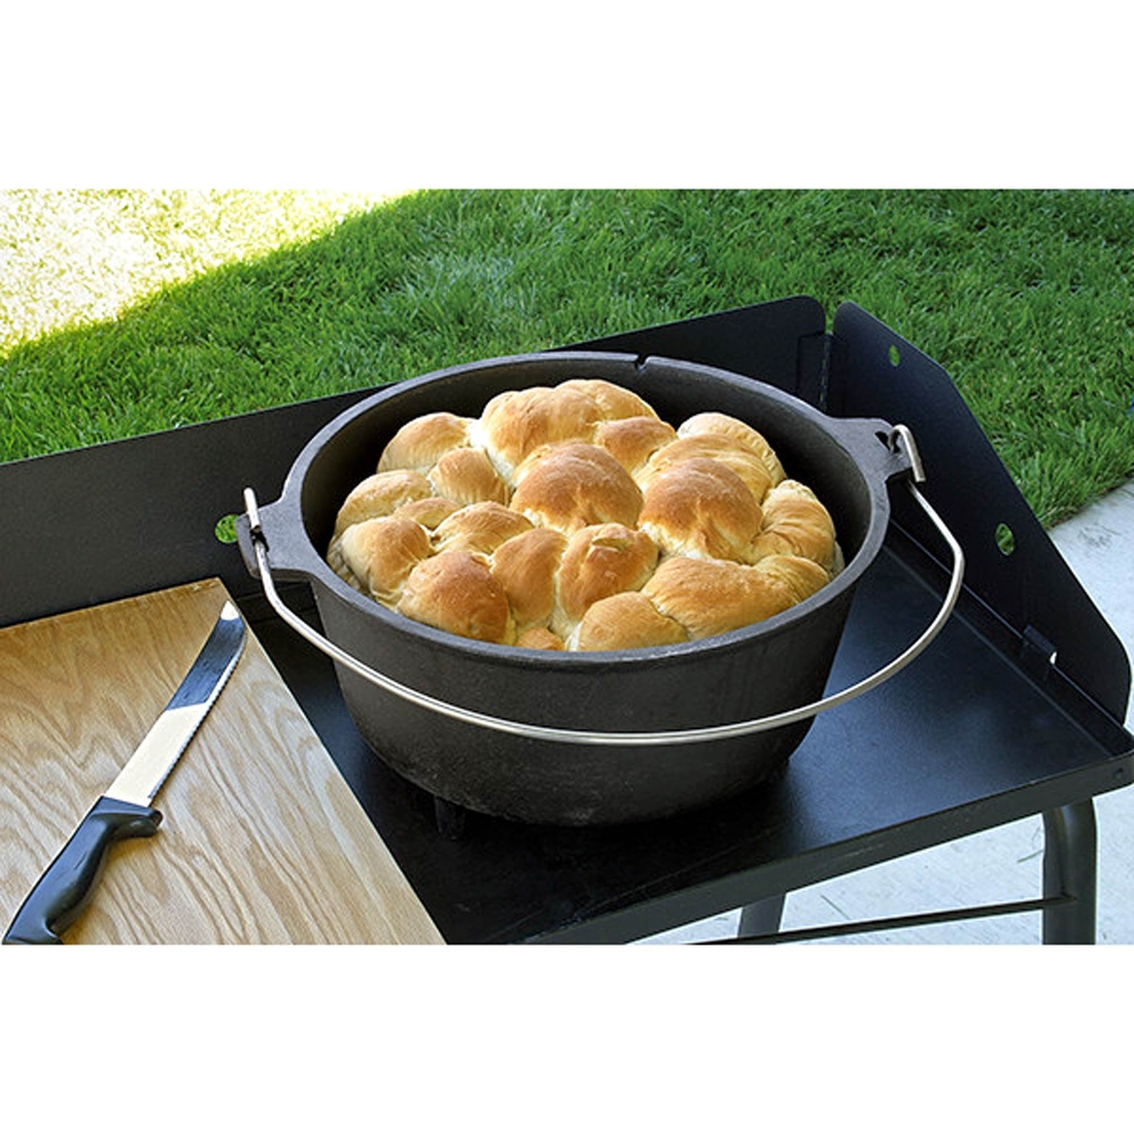 Camp Chef 10 in. Cast Iron Deluxe Dutch Oven - Image 2 of 2